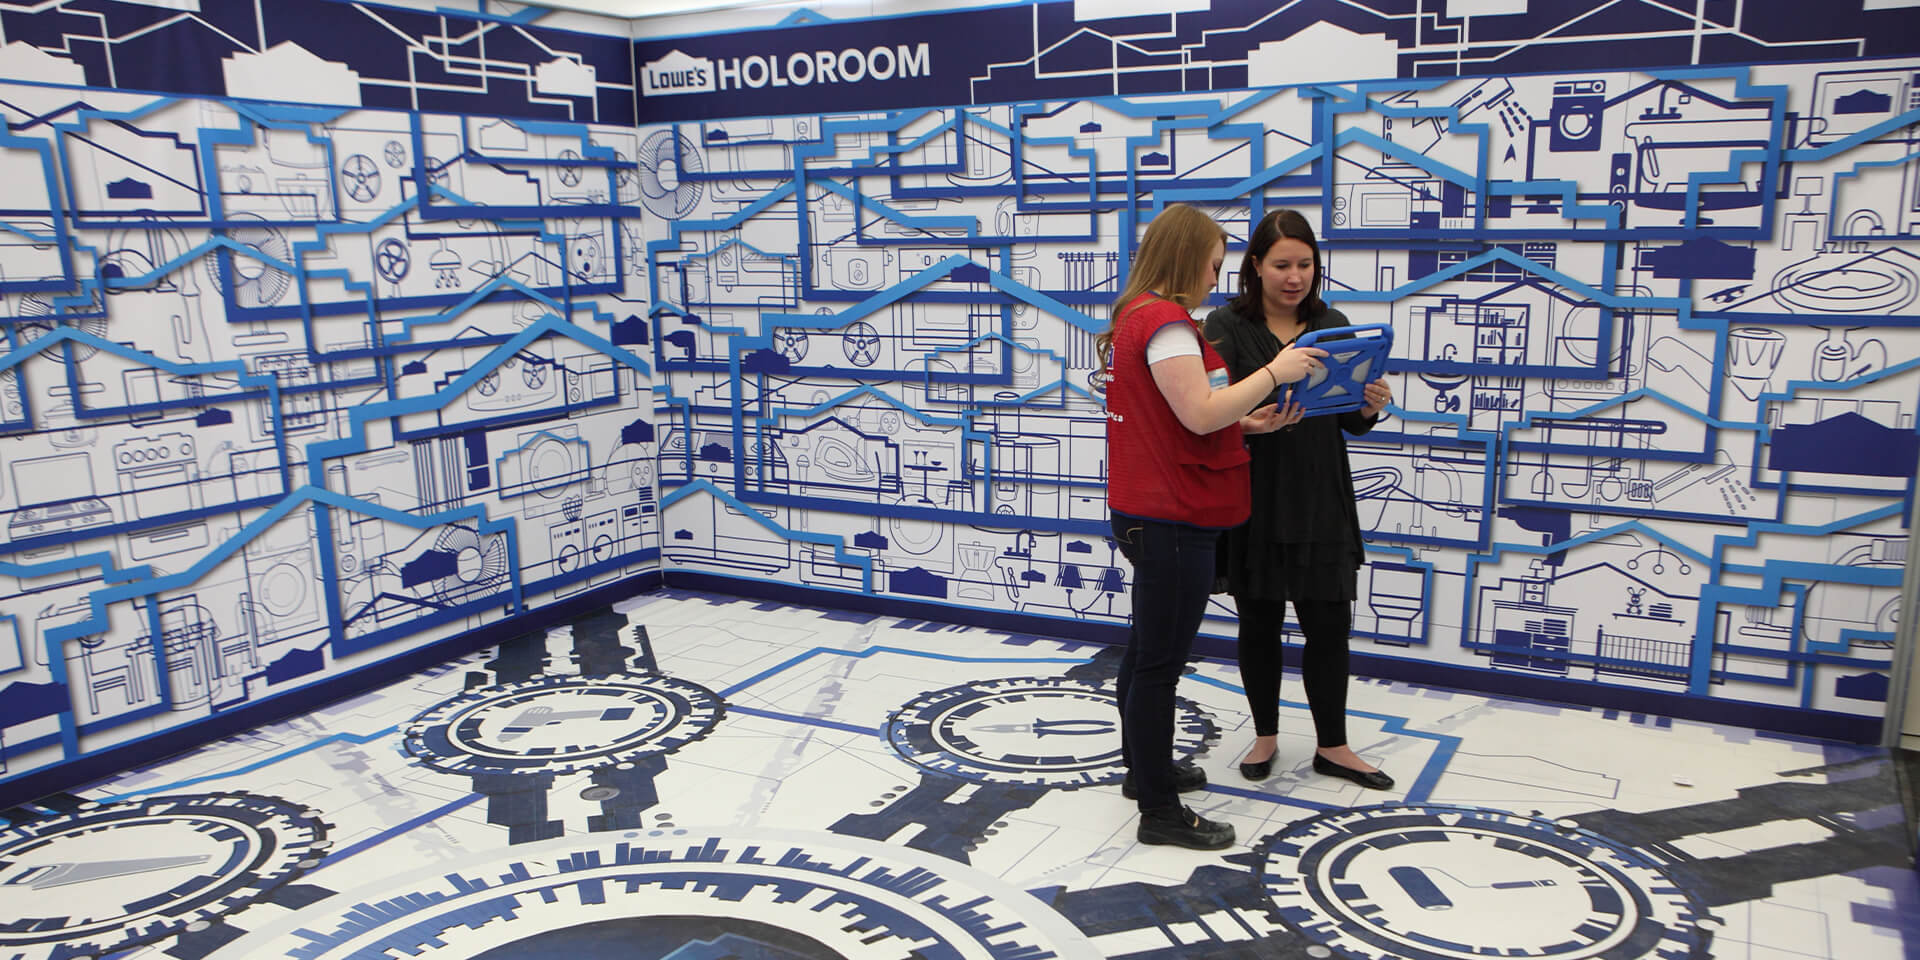 Female Lowes Home Improvement associate showing a female customer how to use the Holoroom VR home improvement design and visualization prototype experience.